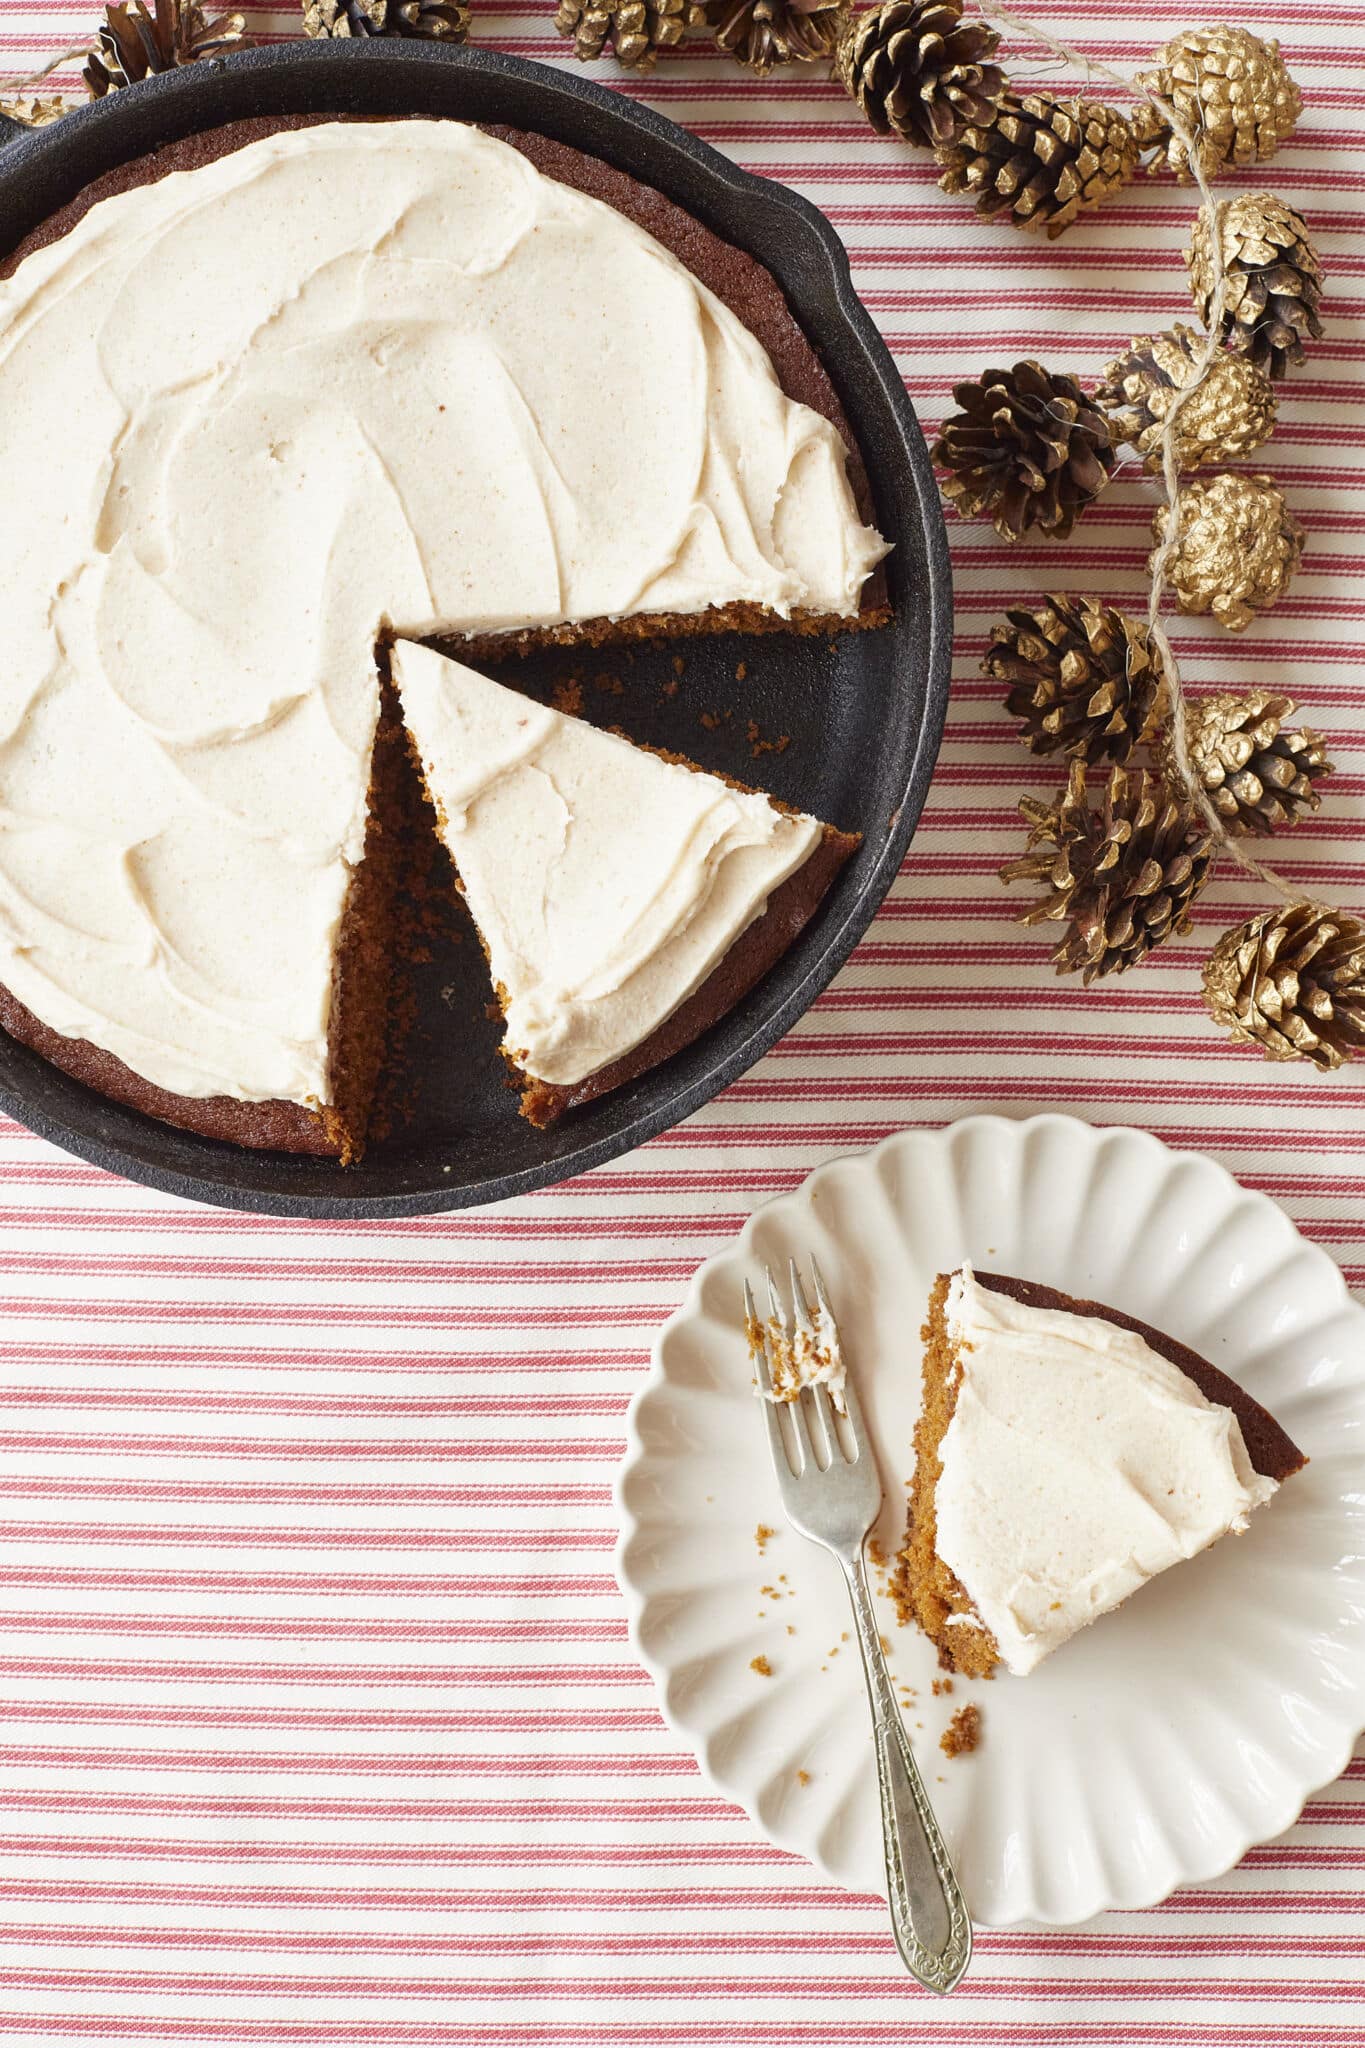 Rich, moist Gingerbread Cake is baked in a cast iron skillet, crowned with velvety Brown Butter Frosting. A slice is served on a dessert plate. Some dried pine cones are decorated on the side.